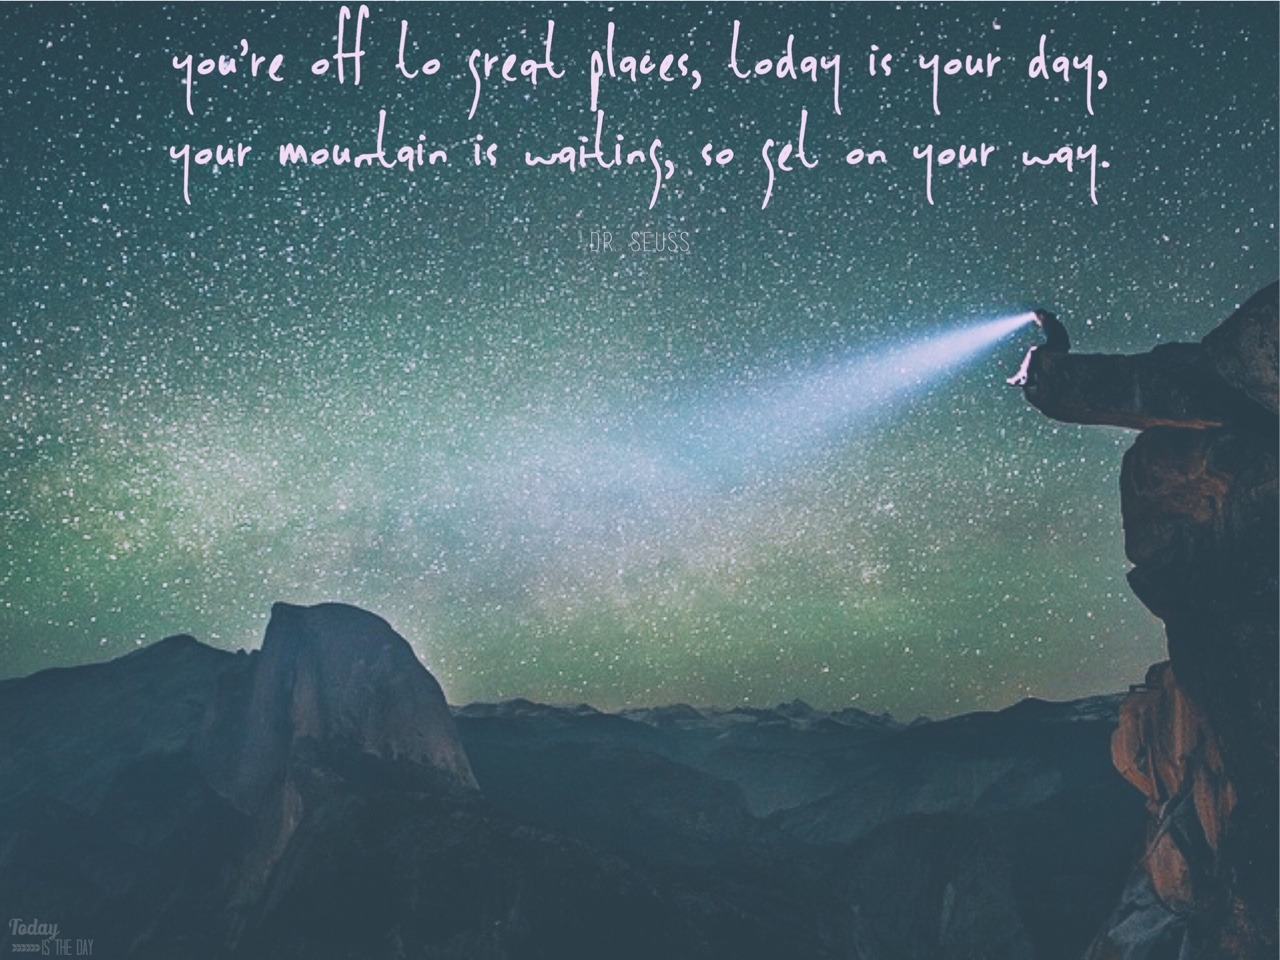 “You’re off to great places, today is your day,... at Today Is The Day